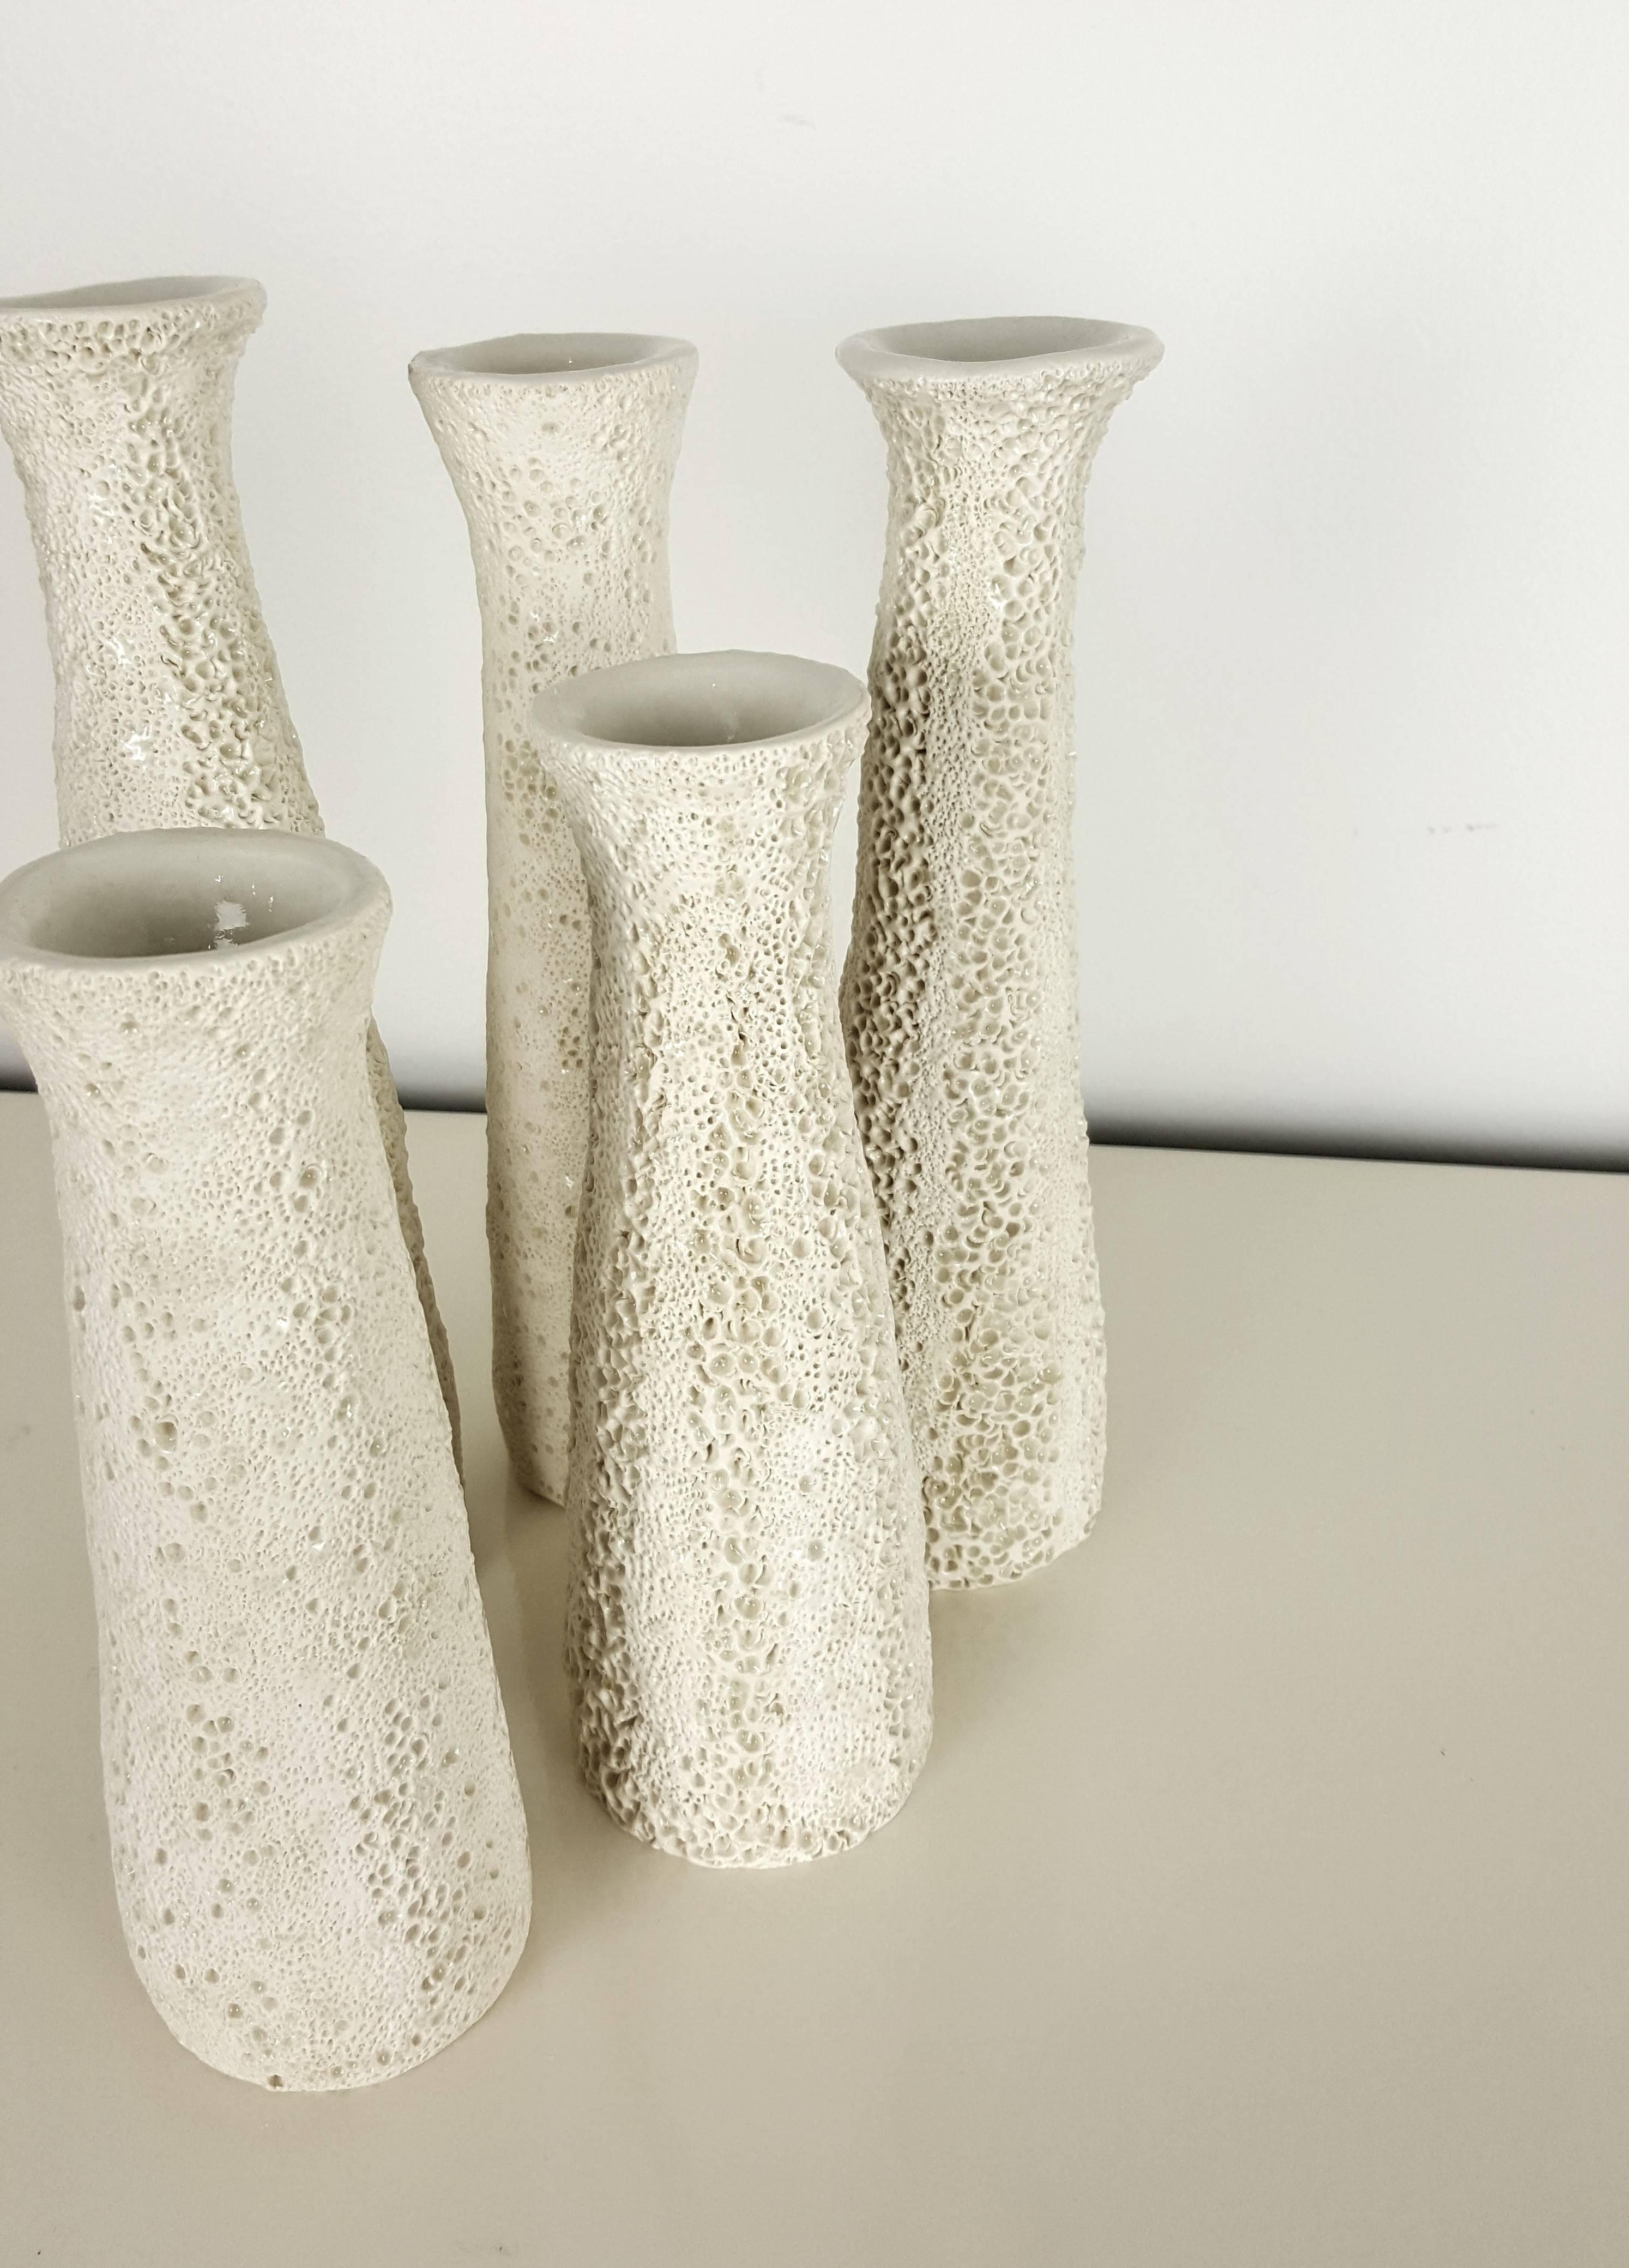 Grouping of candlesticks with applied organic coral texture by Judi Tavill, 2016. Graduated heights from 7.5" to 9.5".

About the artist:

Judi Tavill is a ceramic artist with a studio based on the oceanic shore of New Jersey. Born in 1968